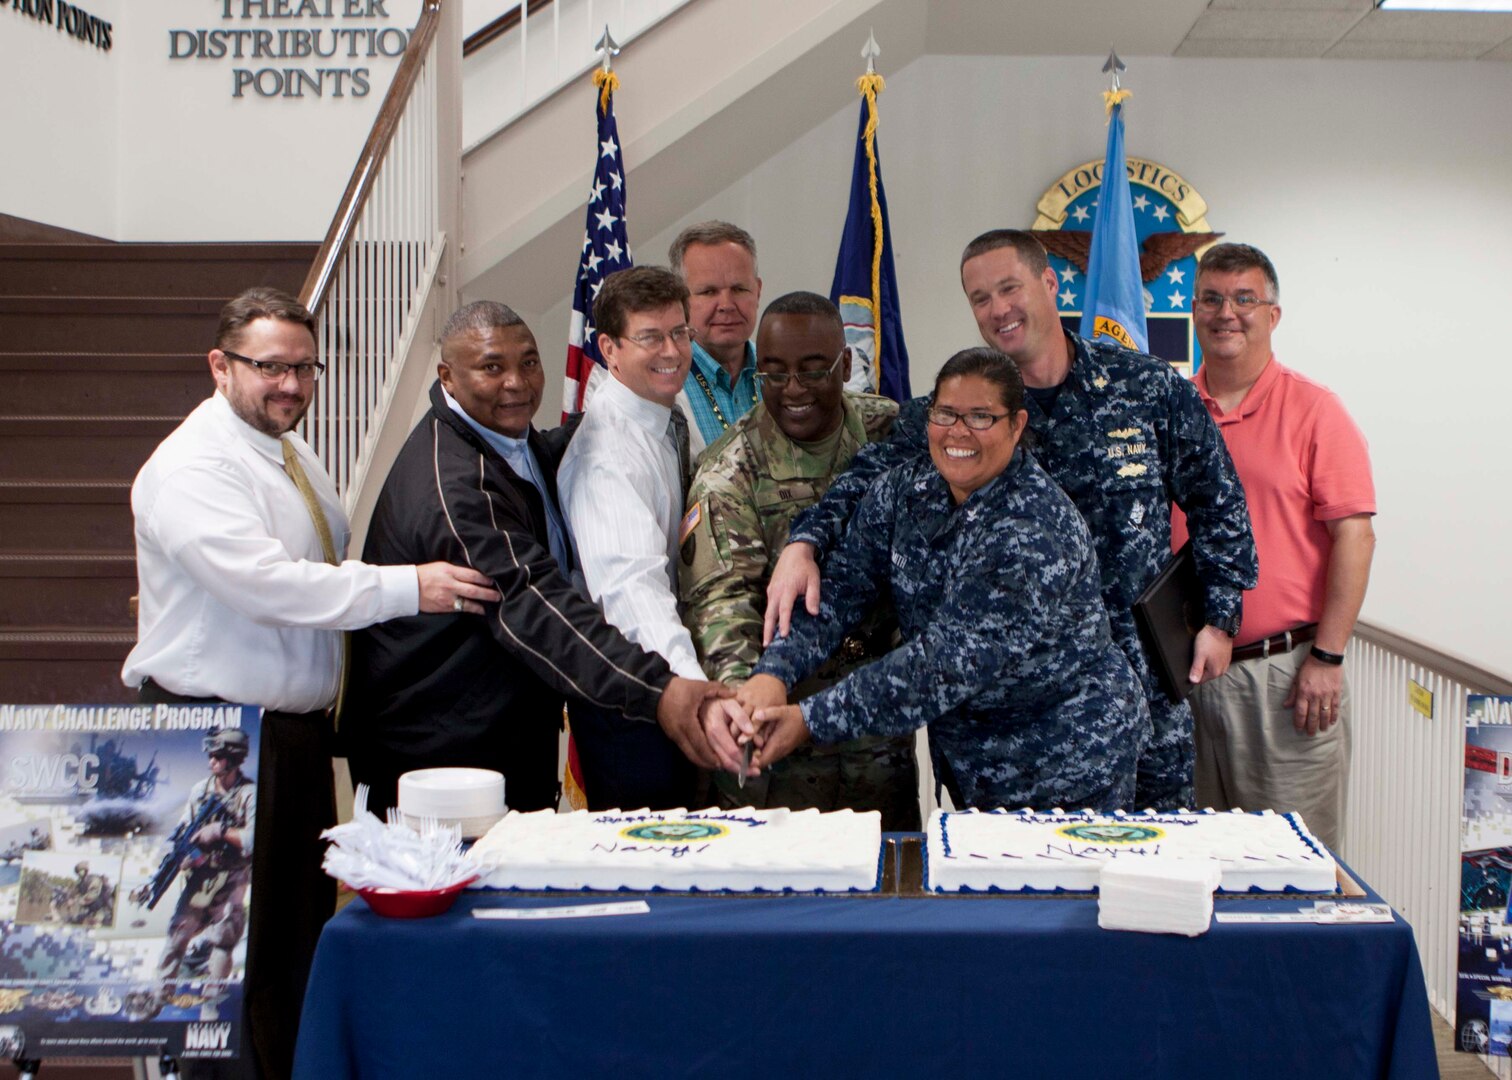 DLA Distribution commander Army Brig. Gen. Richard Dix, center, cuts a cake honoring the Navy’s 240th birthday alongside DLA Distribution’s active, reserve and retired Navy sailors. 